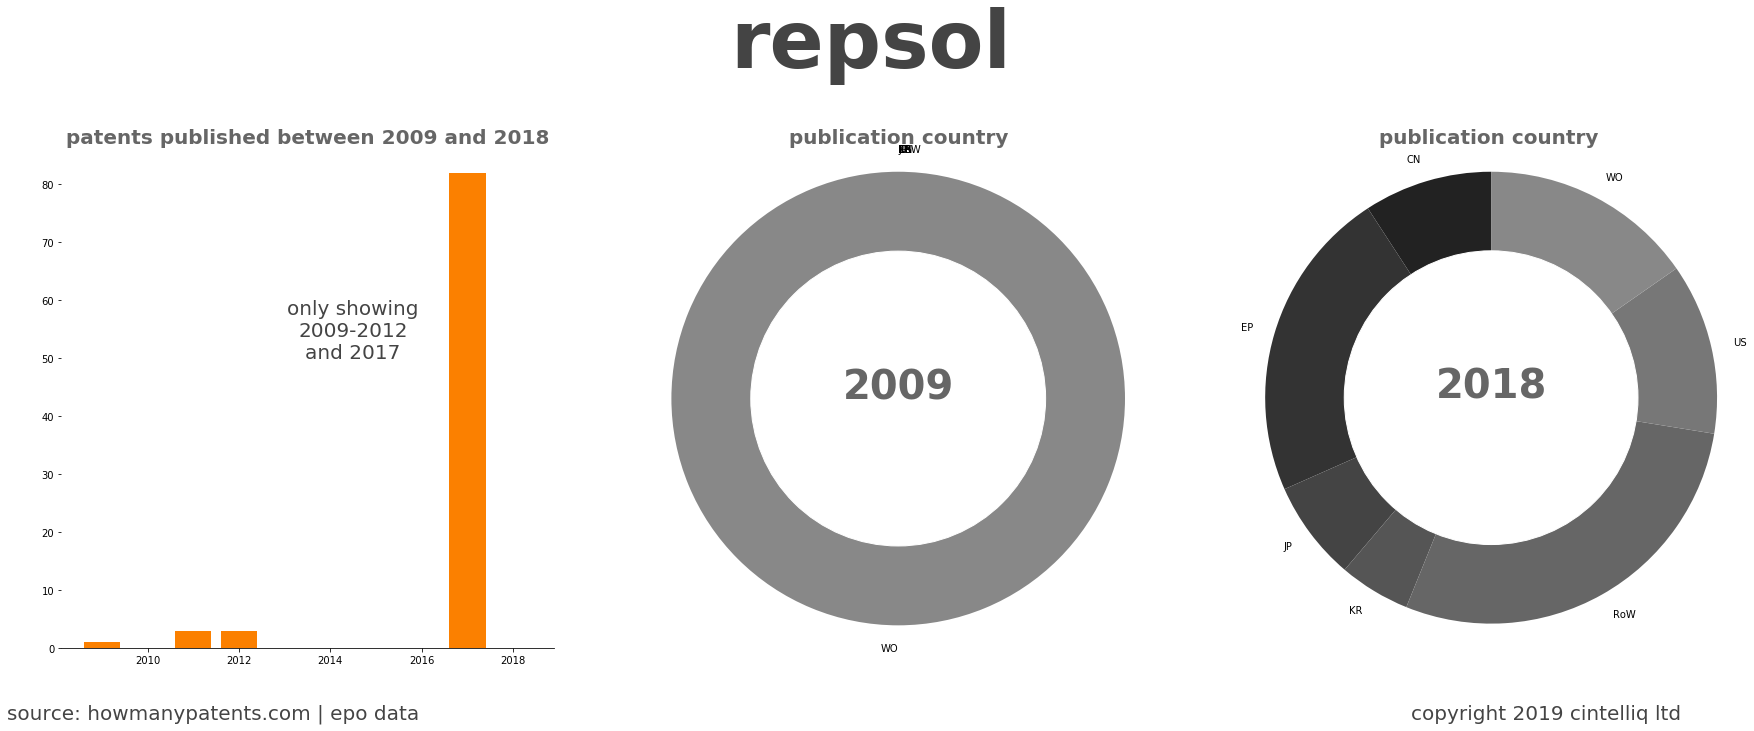 summary of patents for Repsol